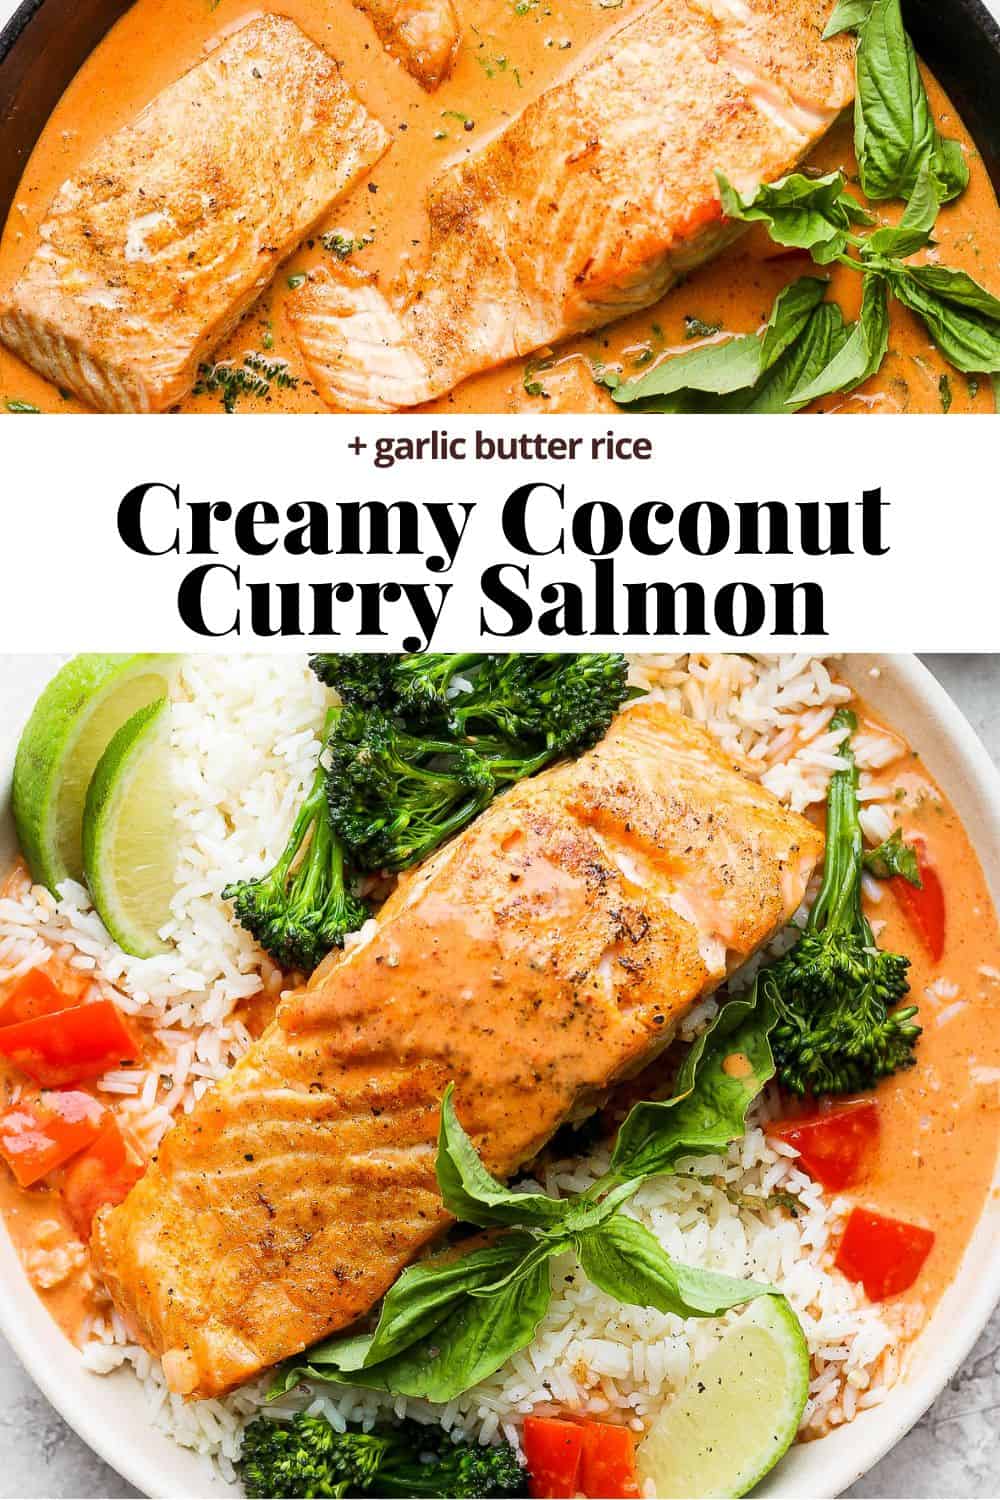 Pinterest image showing salmon fillets in a the cast iron skillet, the recipe title, and the finished dish on a plate.